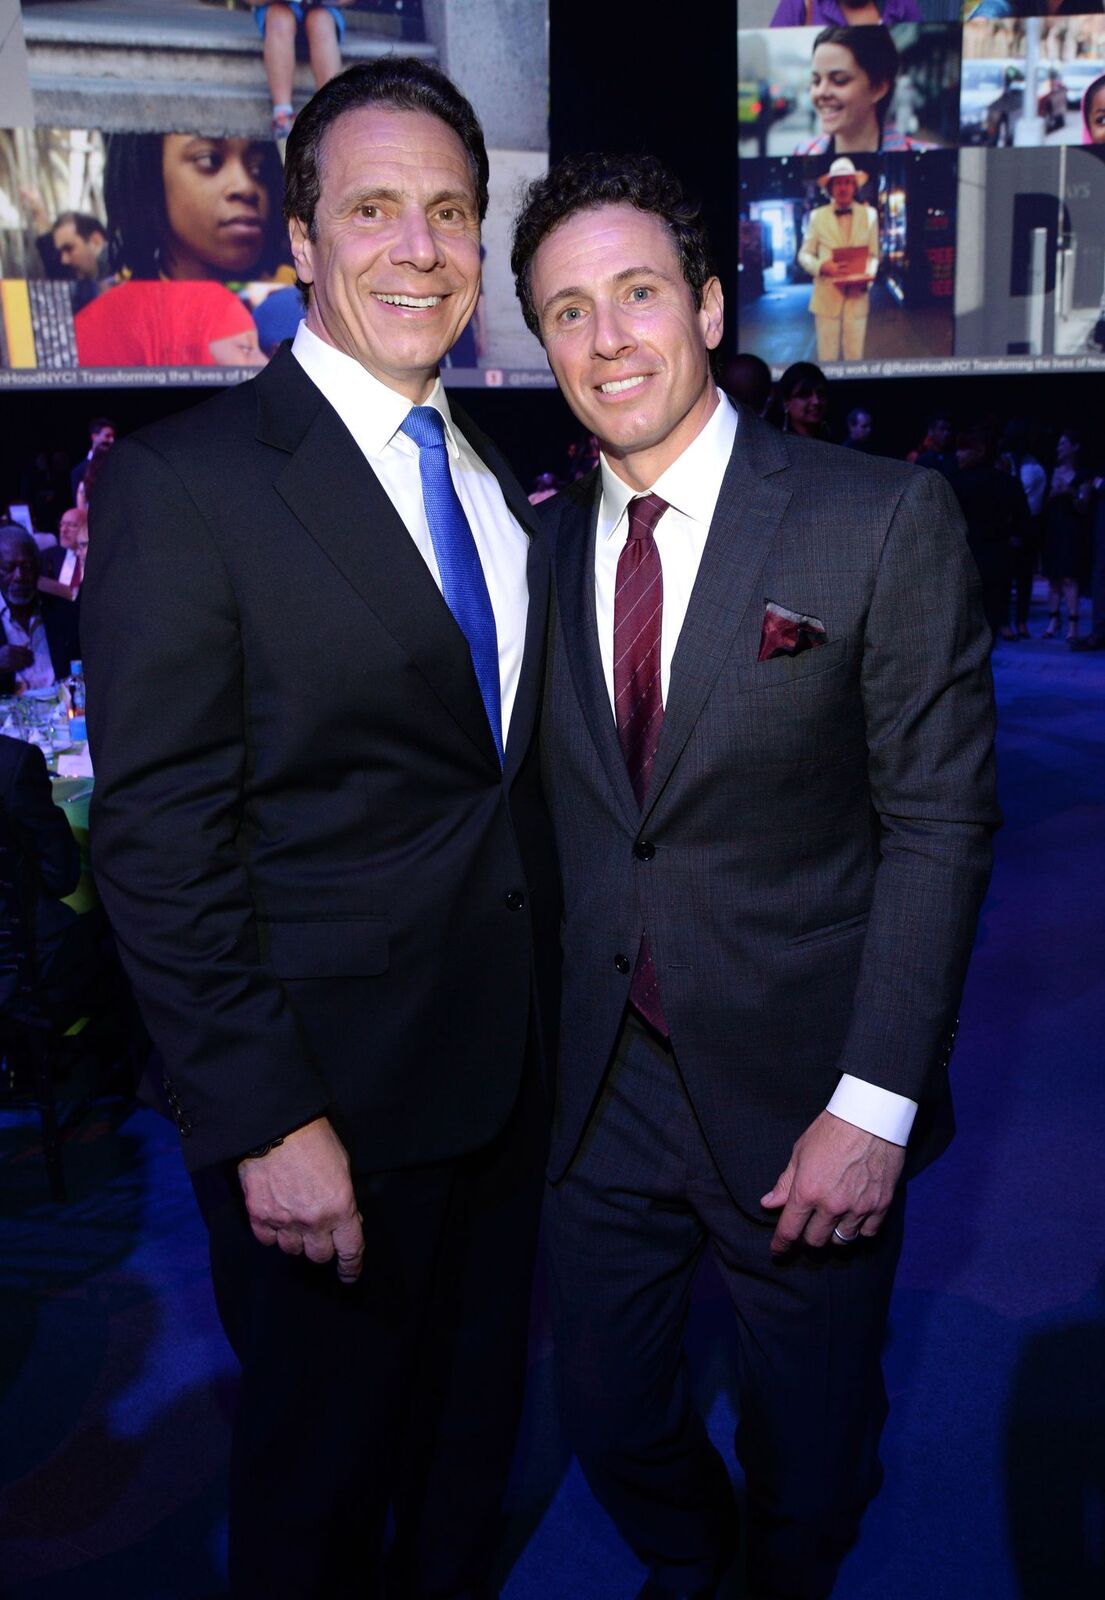 New York Governor Andrew Cuomo and Chris Cuomo attend The Robin Hood Foundation on May 12, 2015 | Photo: Getty Images